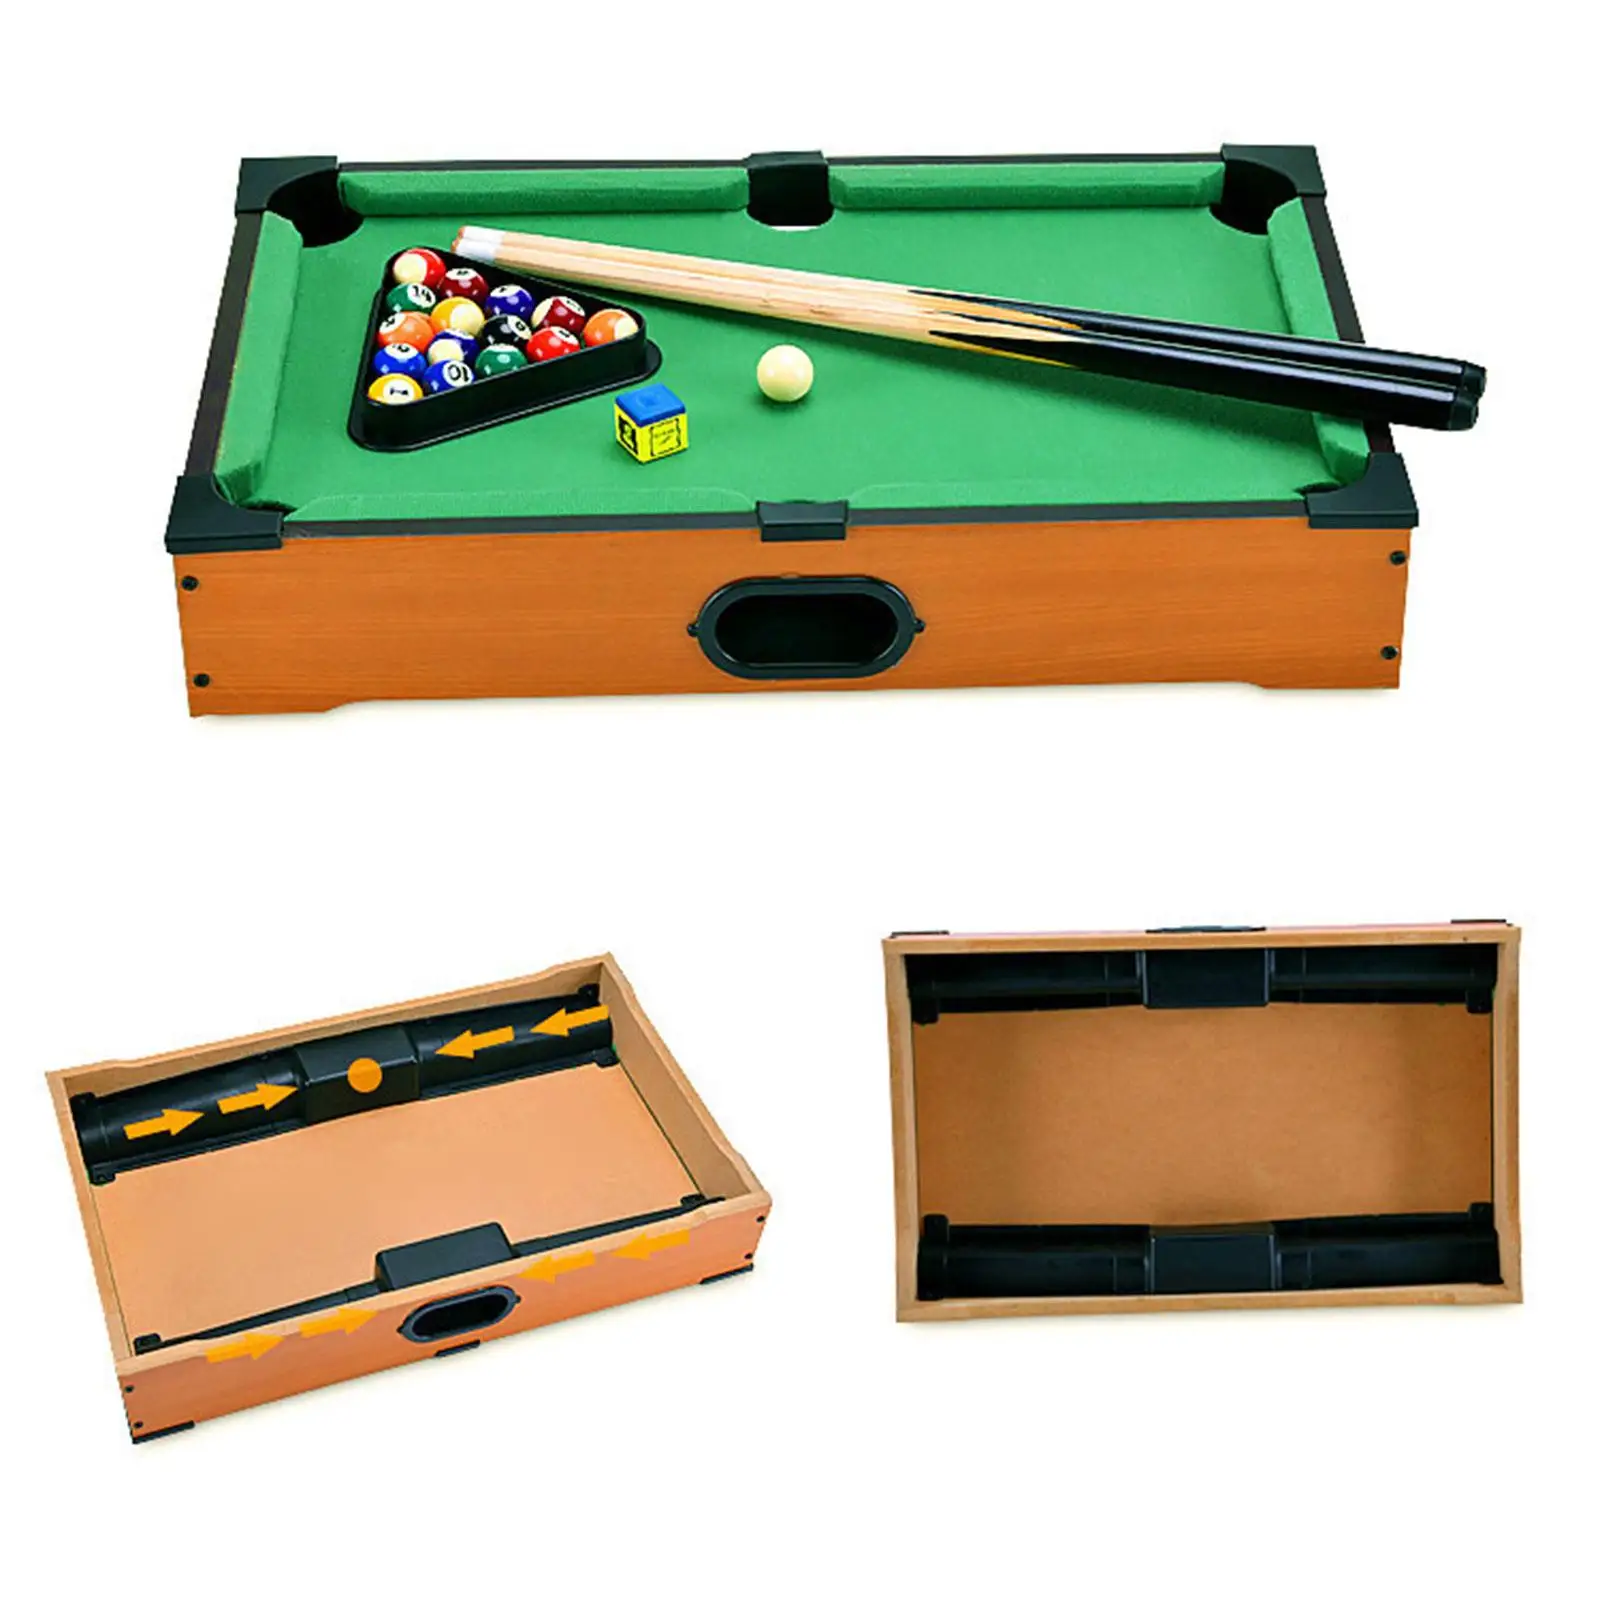 Mini Table Pool Set Home Play Motor Skills Easy to Install Miniature Billiard Game Wood for Home Desk Playroom Game Room Travel